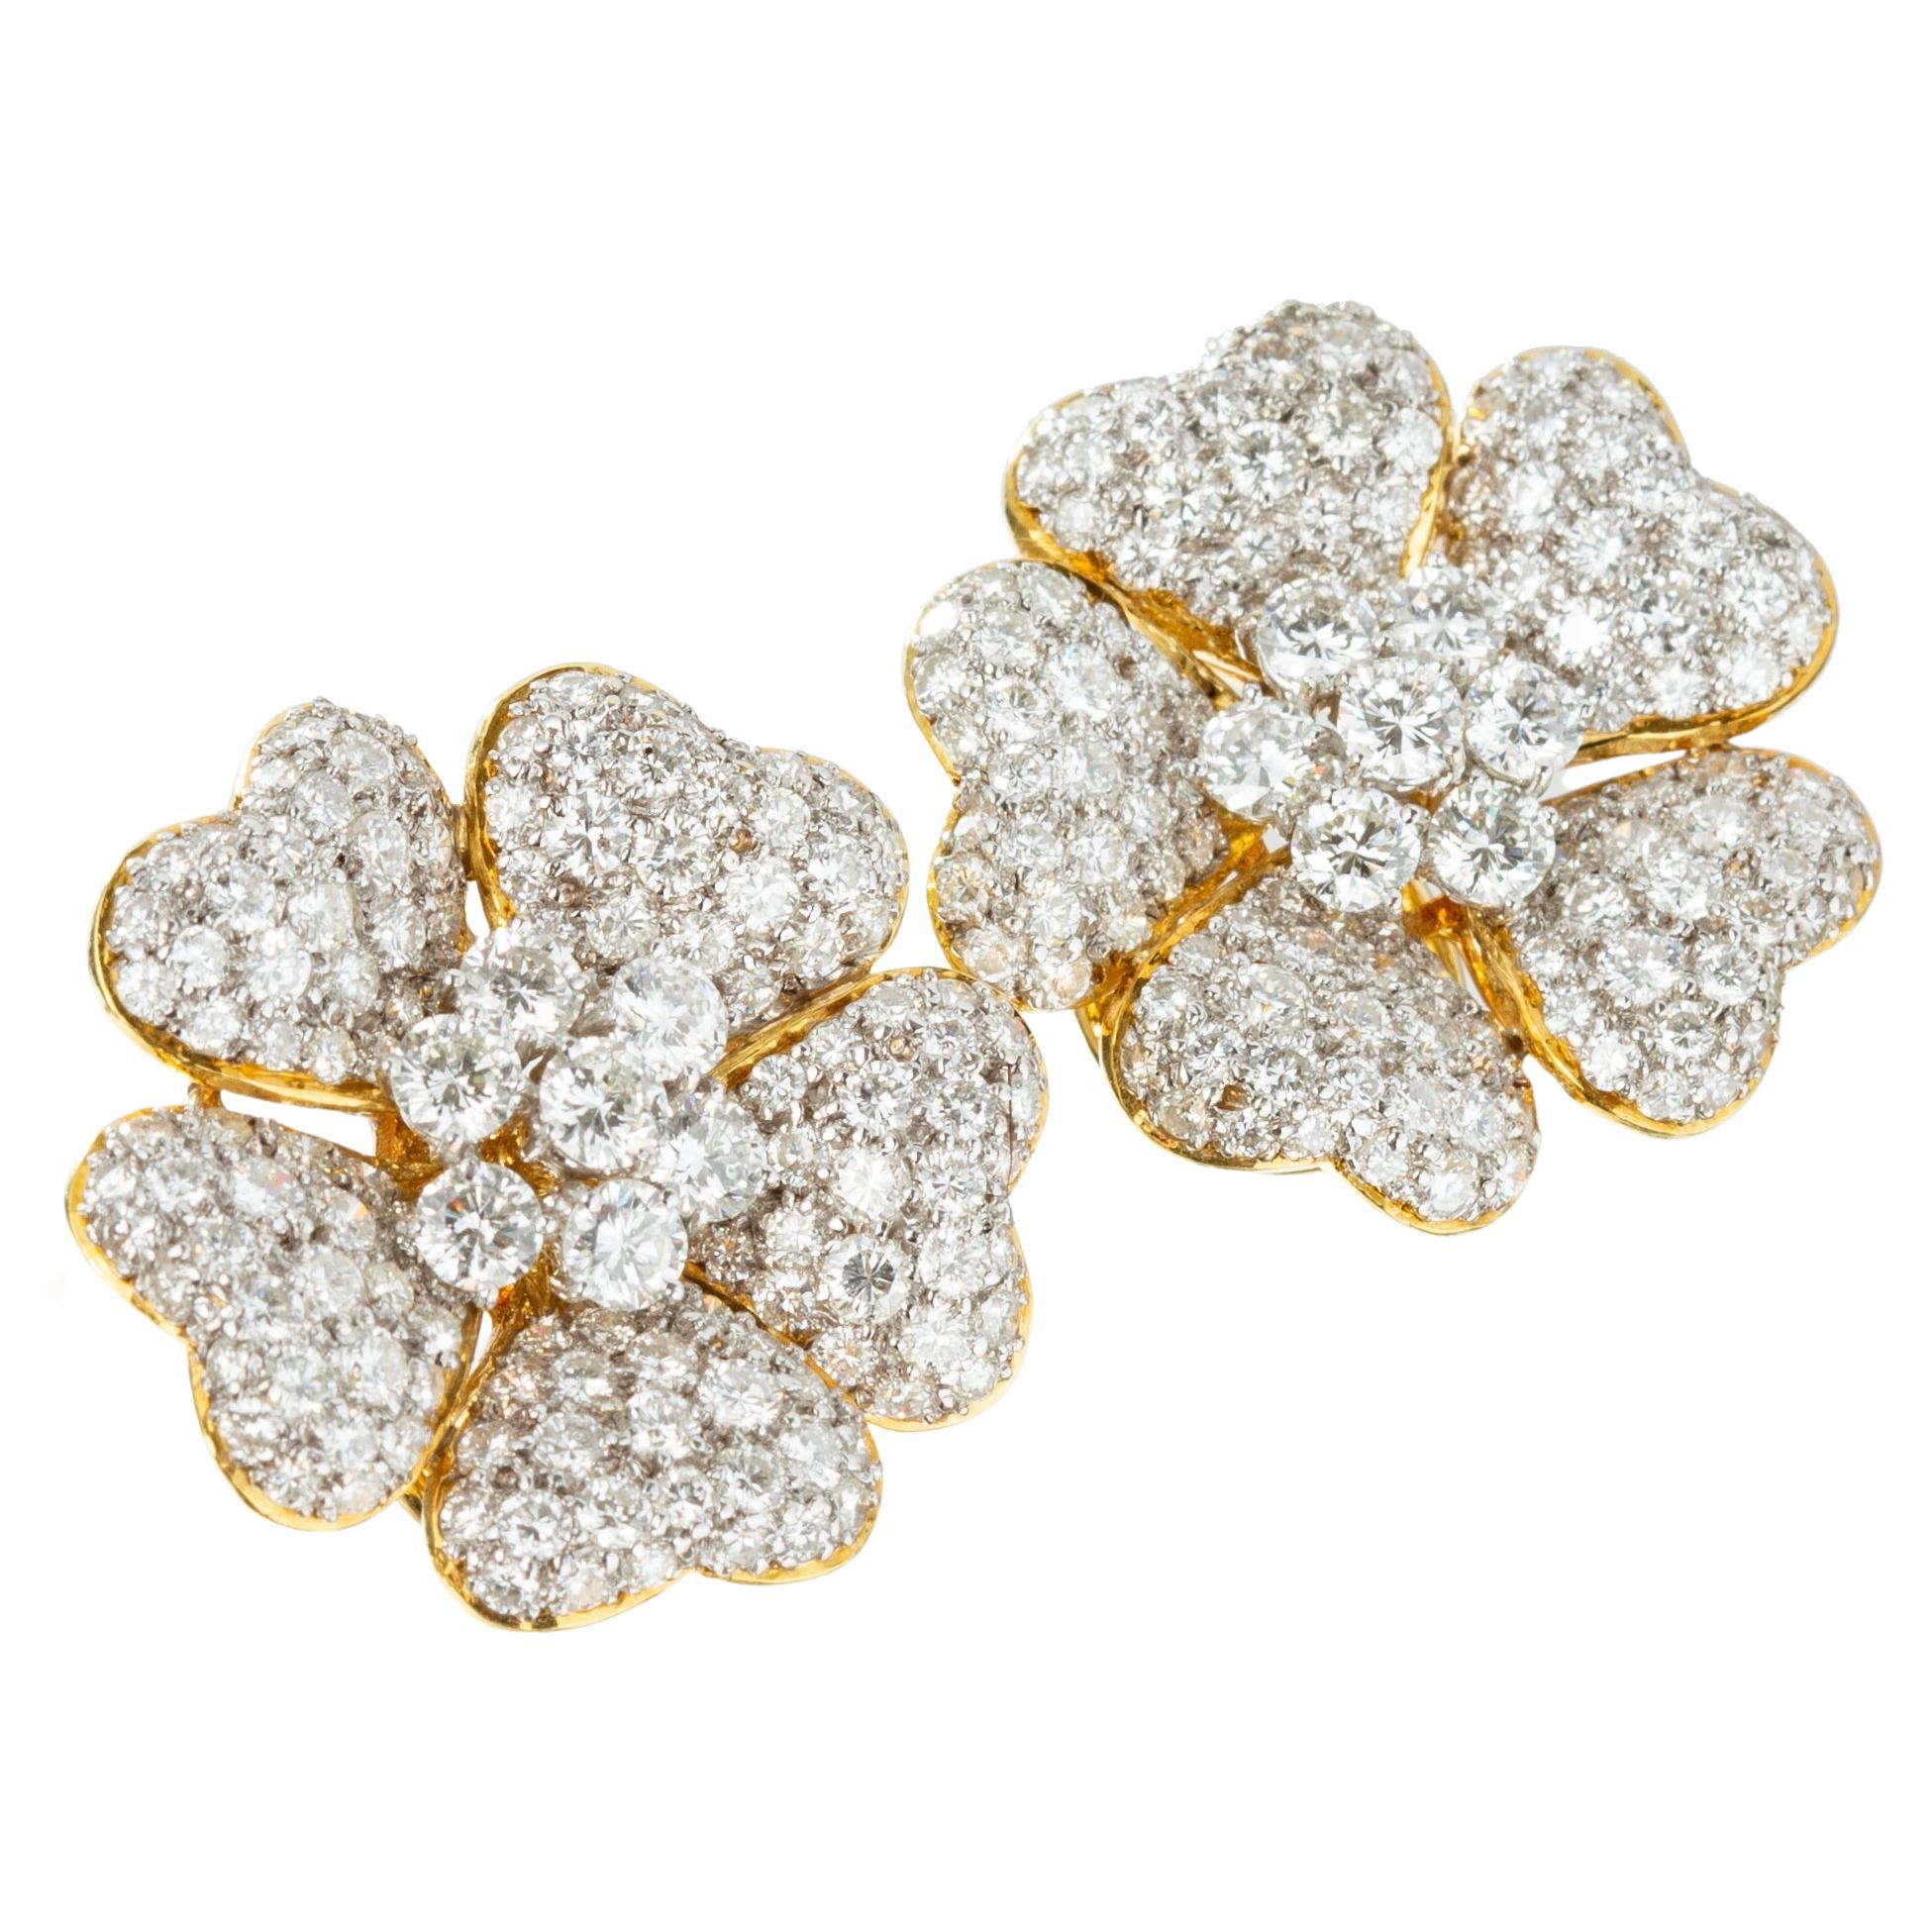 Floral petal earrings in 18k yellow gold and pavé-set with three hundred fifty-four round brilliant-cut diamonds throughout totaling 5.68ct. Measuring approximately 1